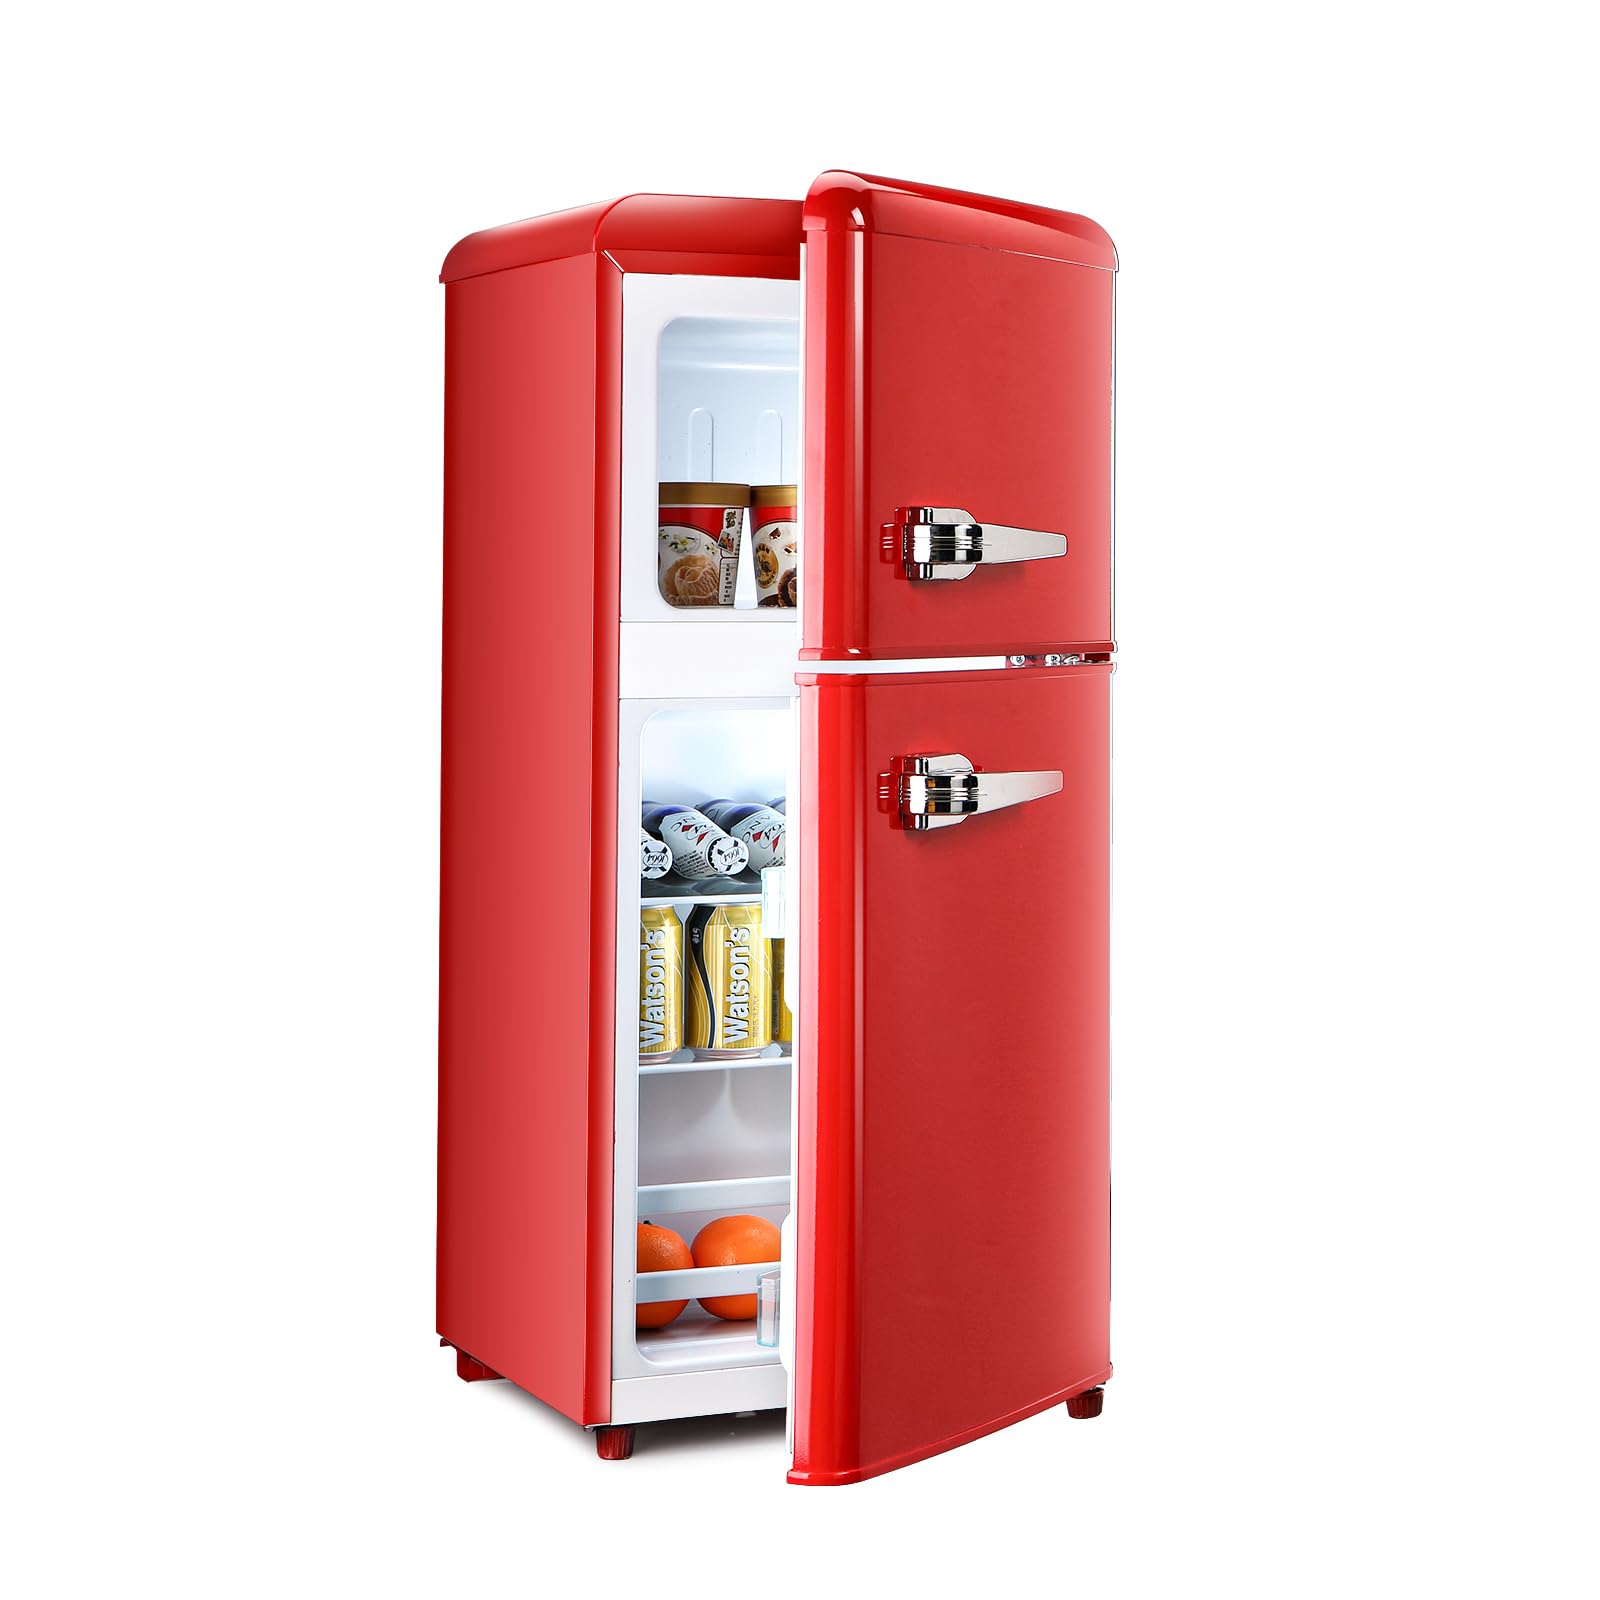 Tymyp 2-Door Fridge With Freezer, Retro Small Fridge 3.2 Cu. Ft Compact Refrigerator with Removable Shelves and Adjustable Thermostat for Office, Bedroom, Dorm(Red)